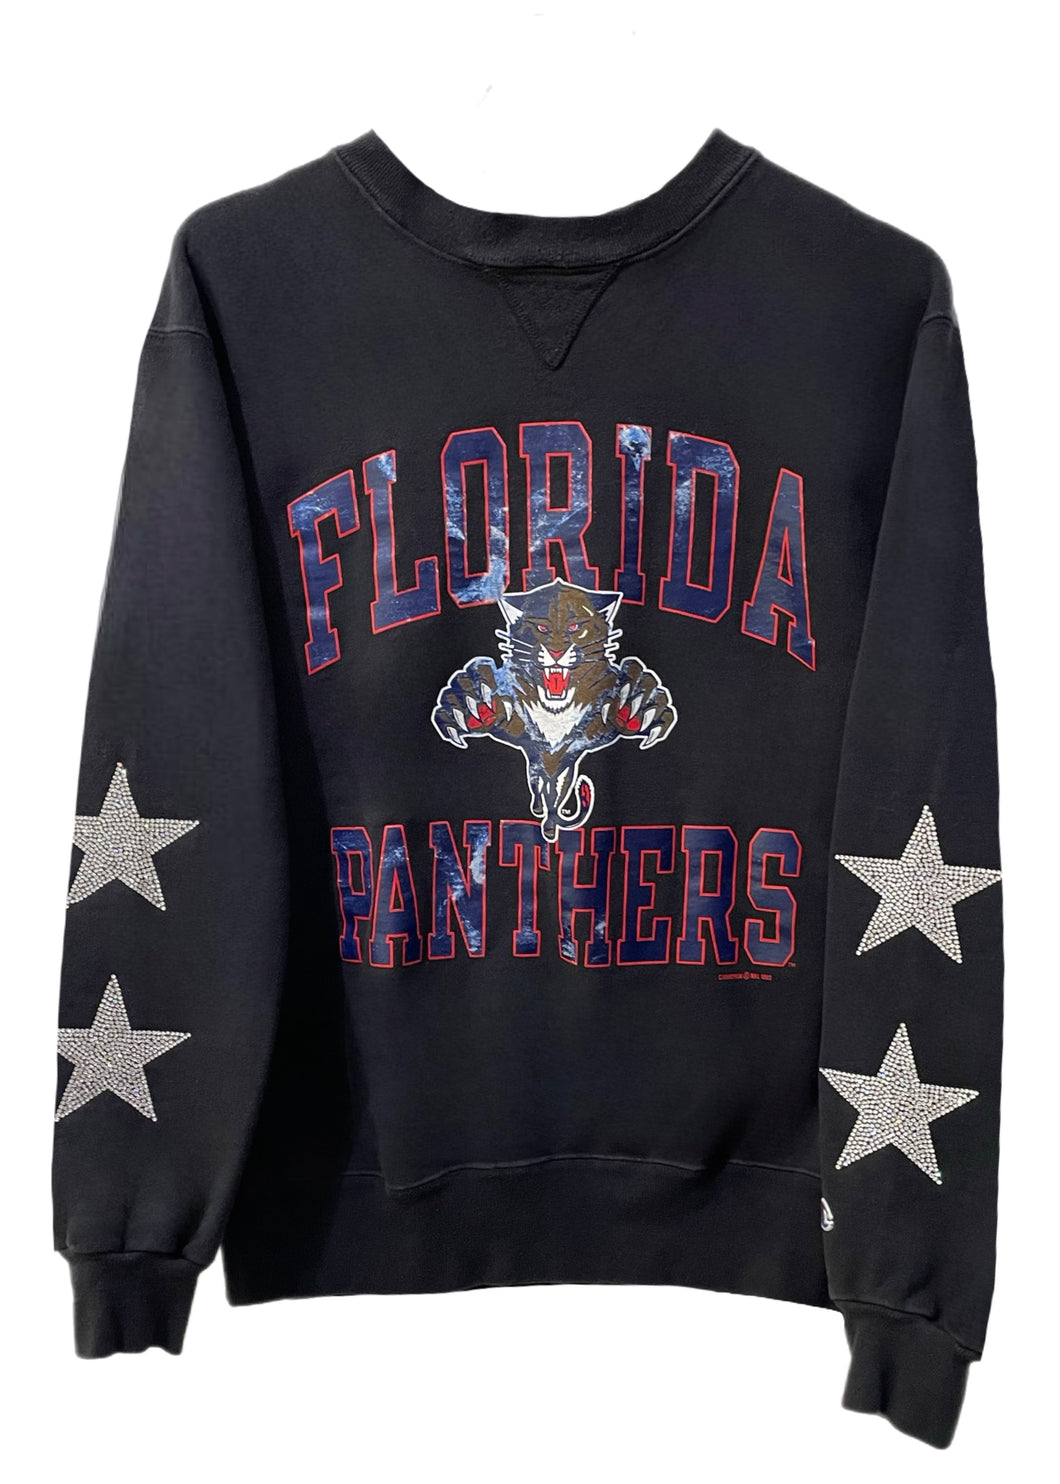 Florida Panthers, Hockey One of a KIND Vintage Sweatshirt with Crystal Star Design